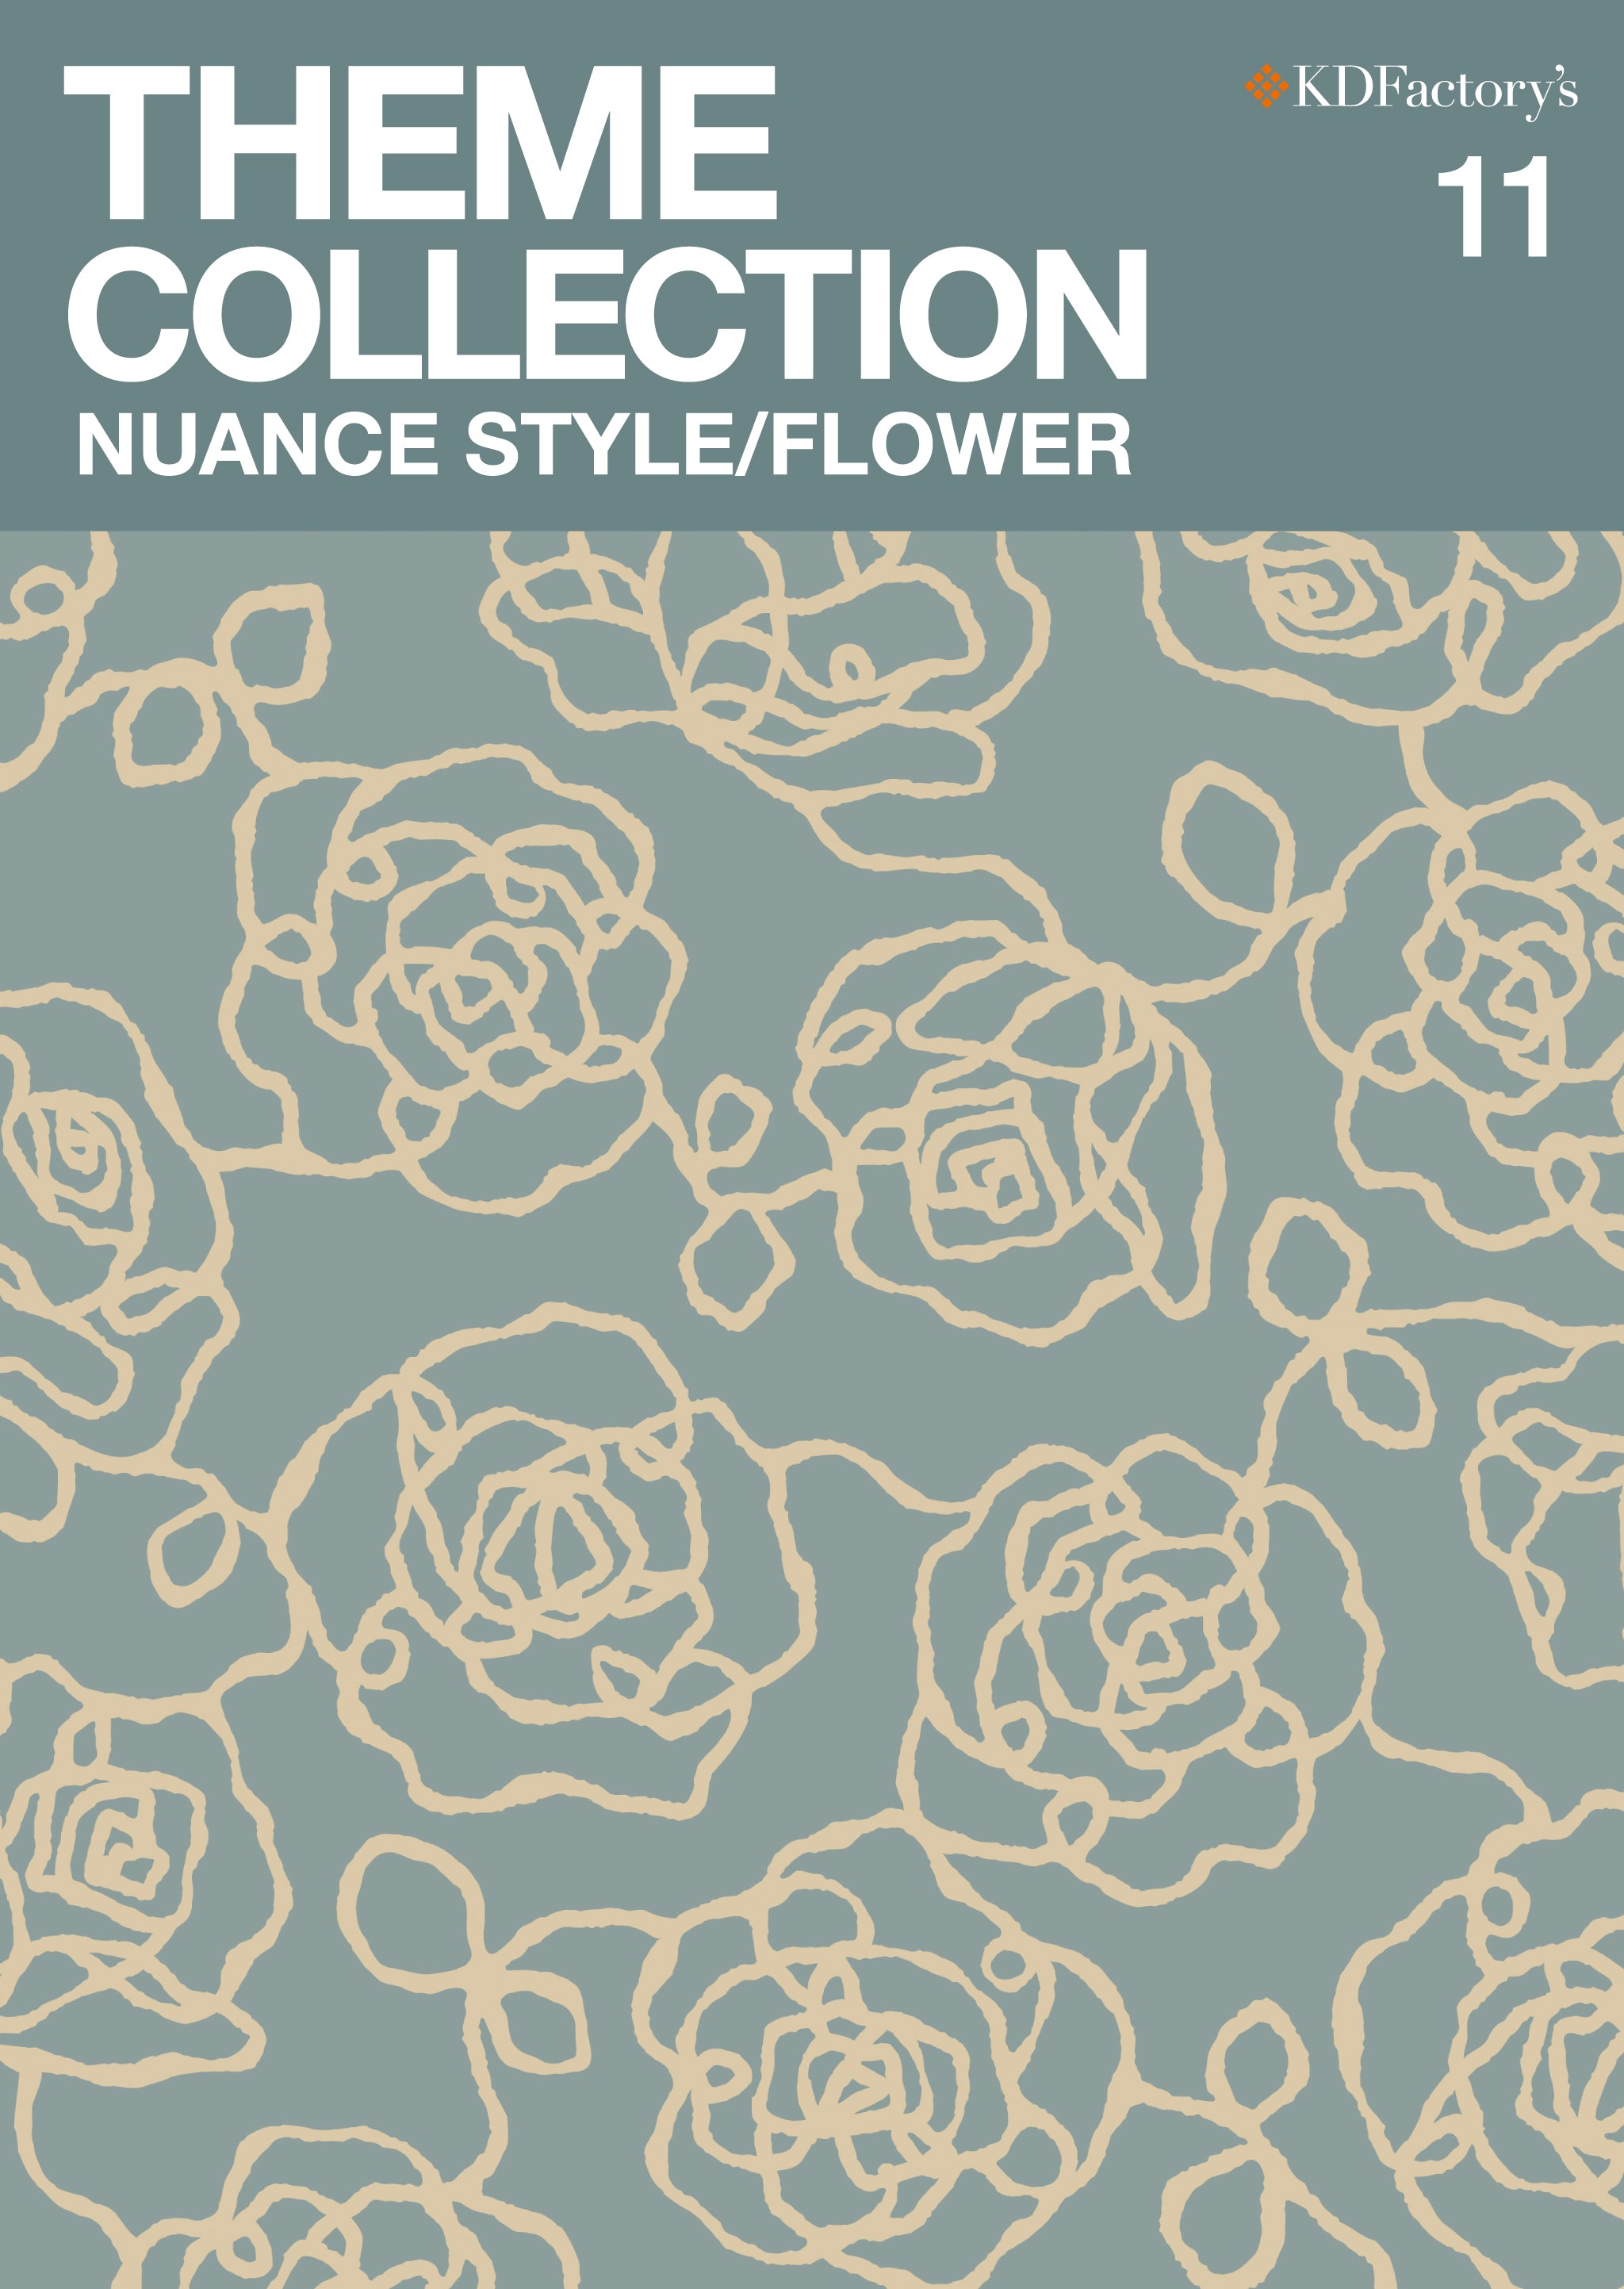 「THEME COLLECTION」11.NUANCE STYLE/FLOWER【ニュアンス スタイル/フラワー】